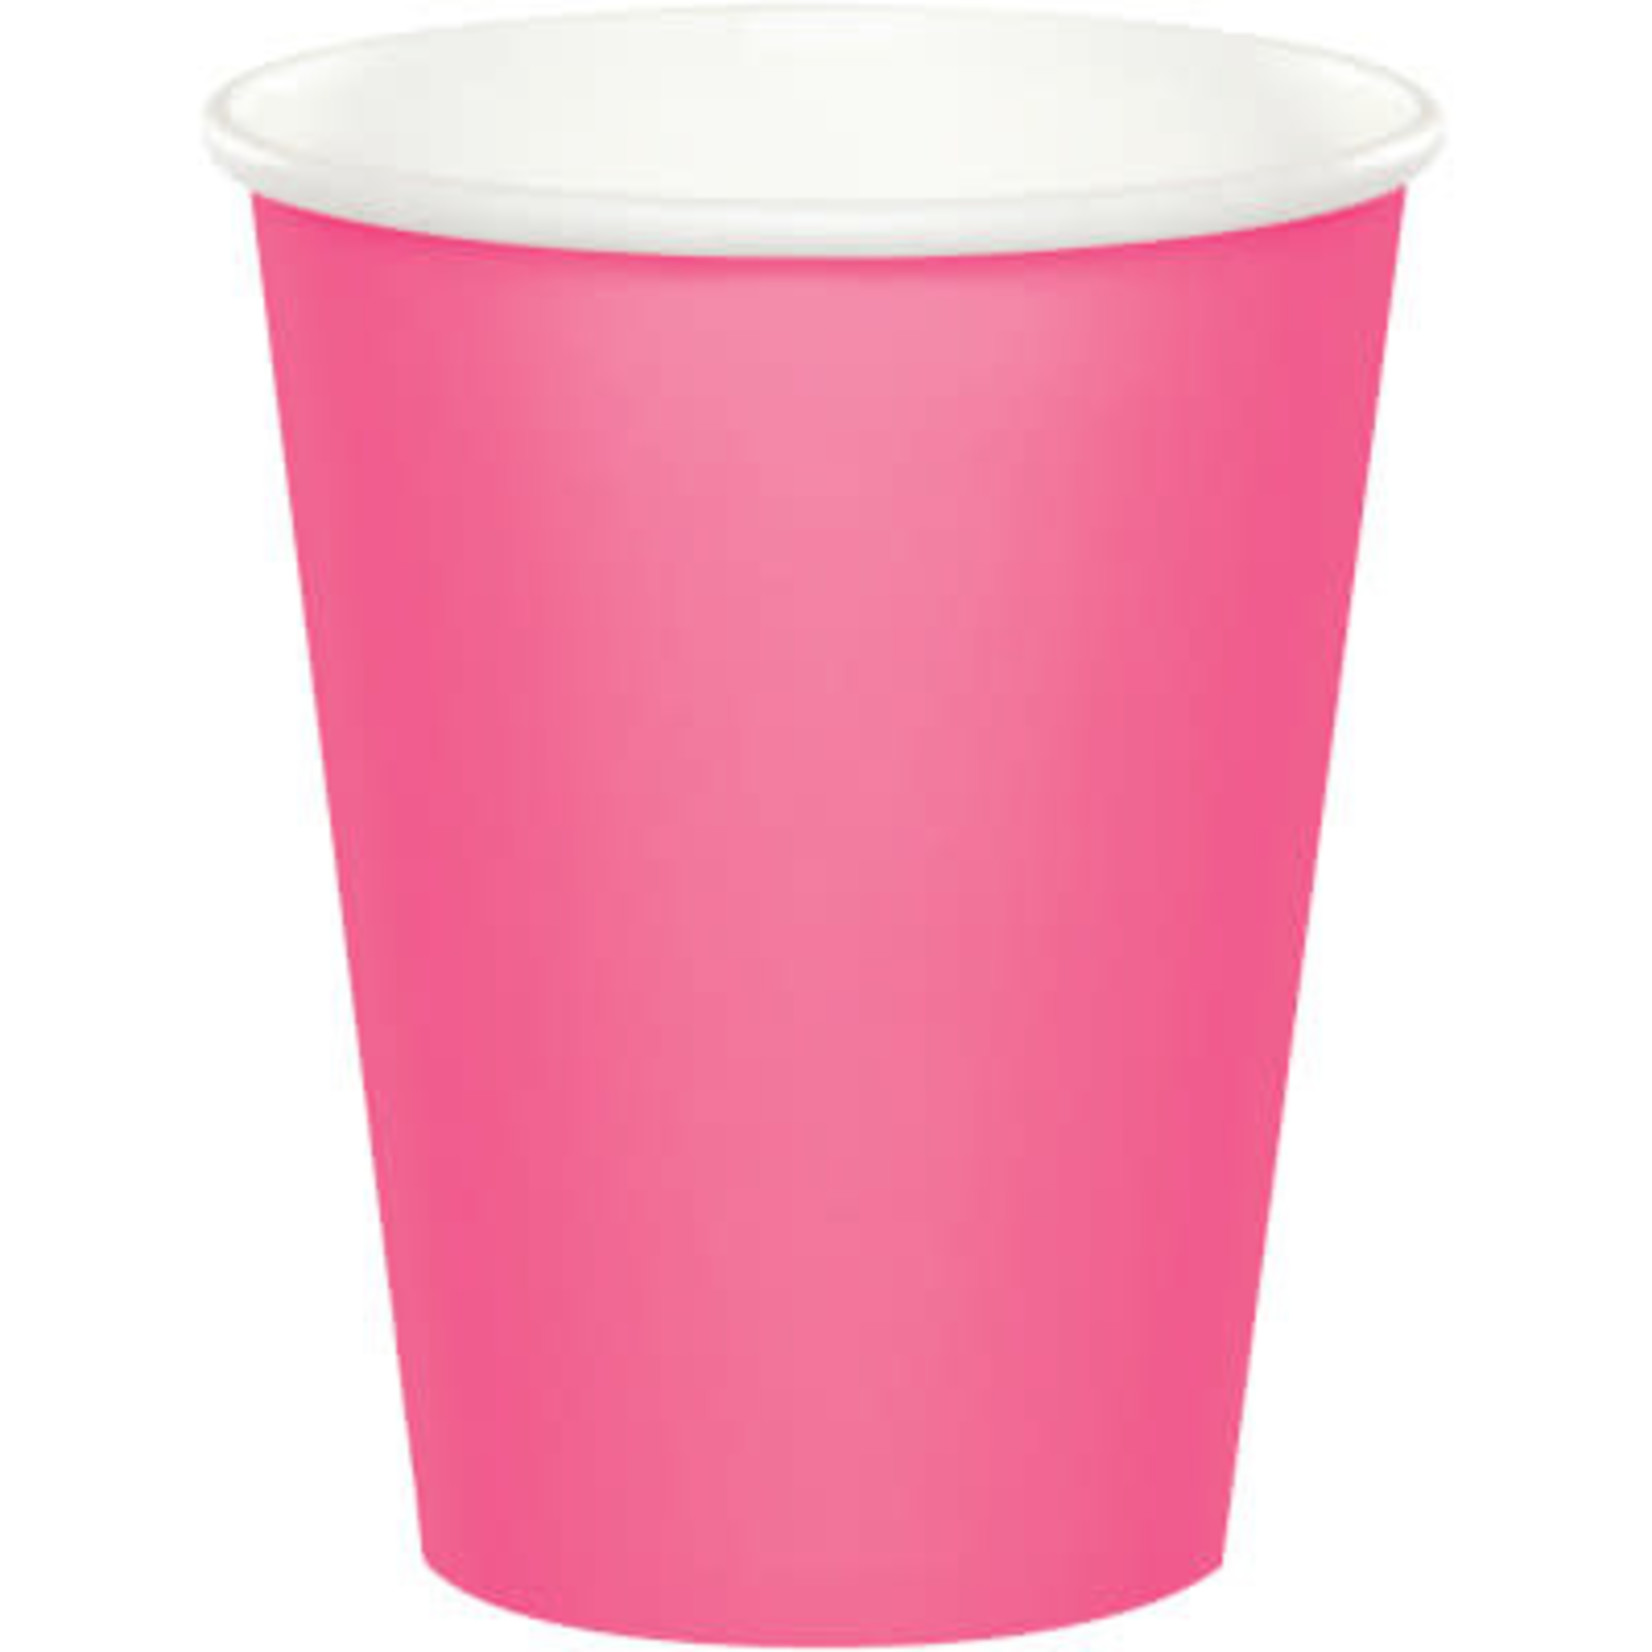 Touch of Color 9oz. Candy Pink Hot/Cold Paper Cups - 24ct.